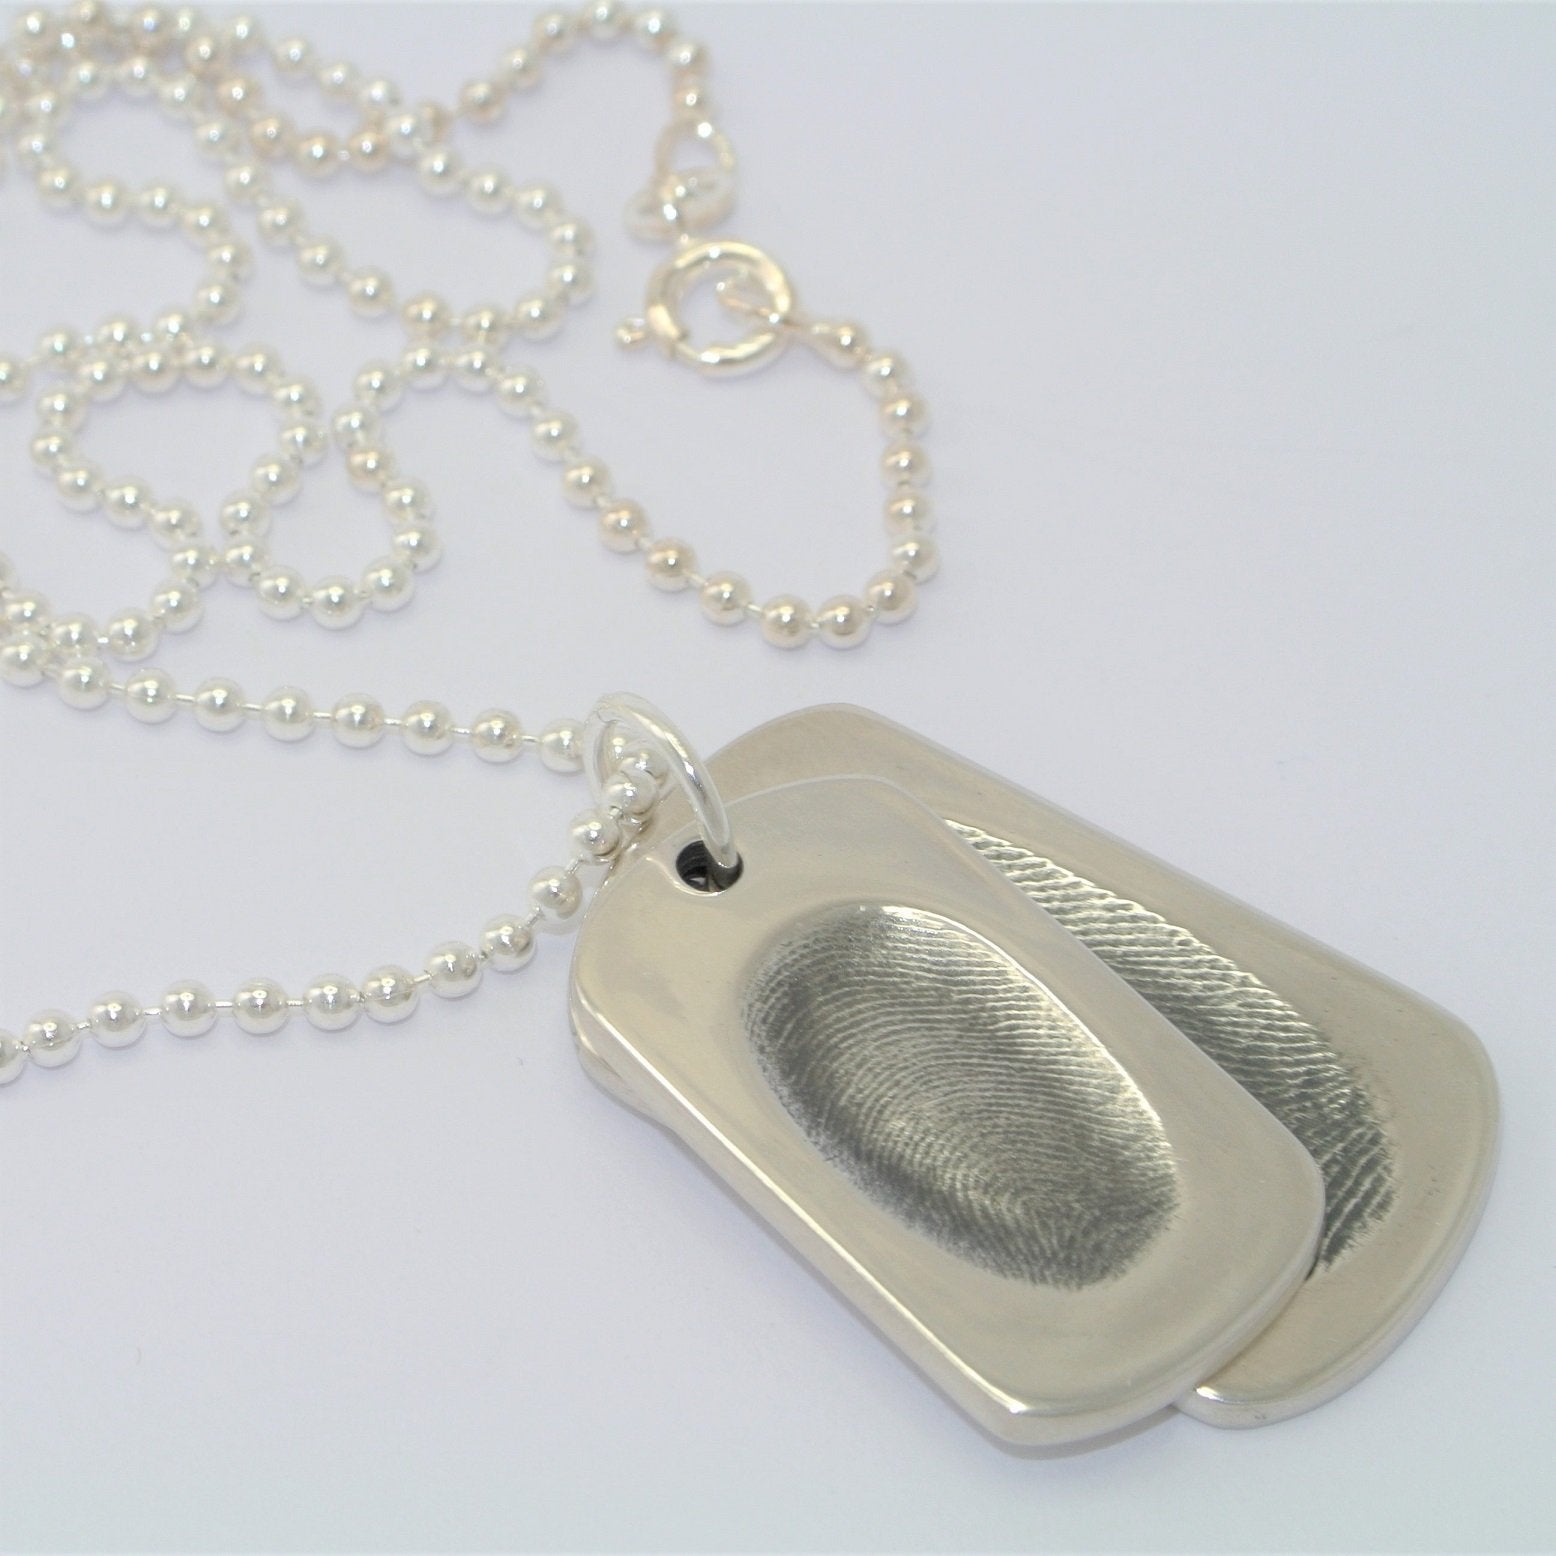 Gifts for him. Fingerprint, Handprints, Pawprint Necklaces, Bracelets and Keyrings Jewellery Collection.